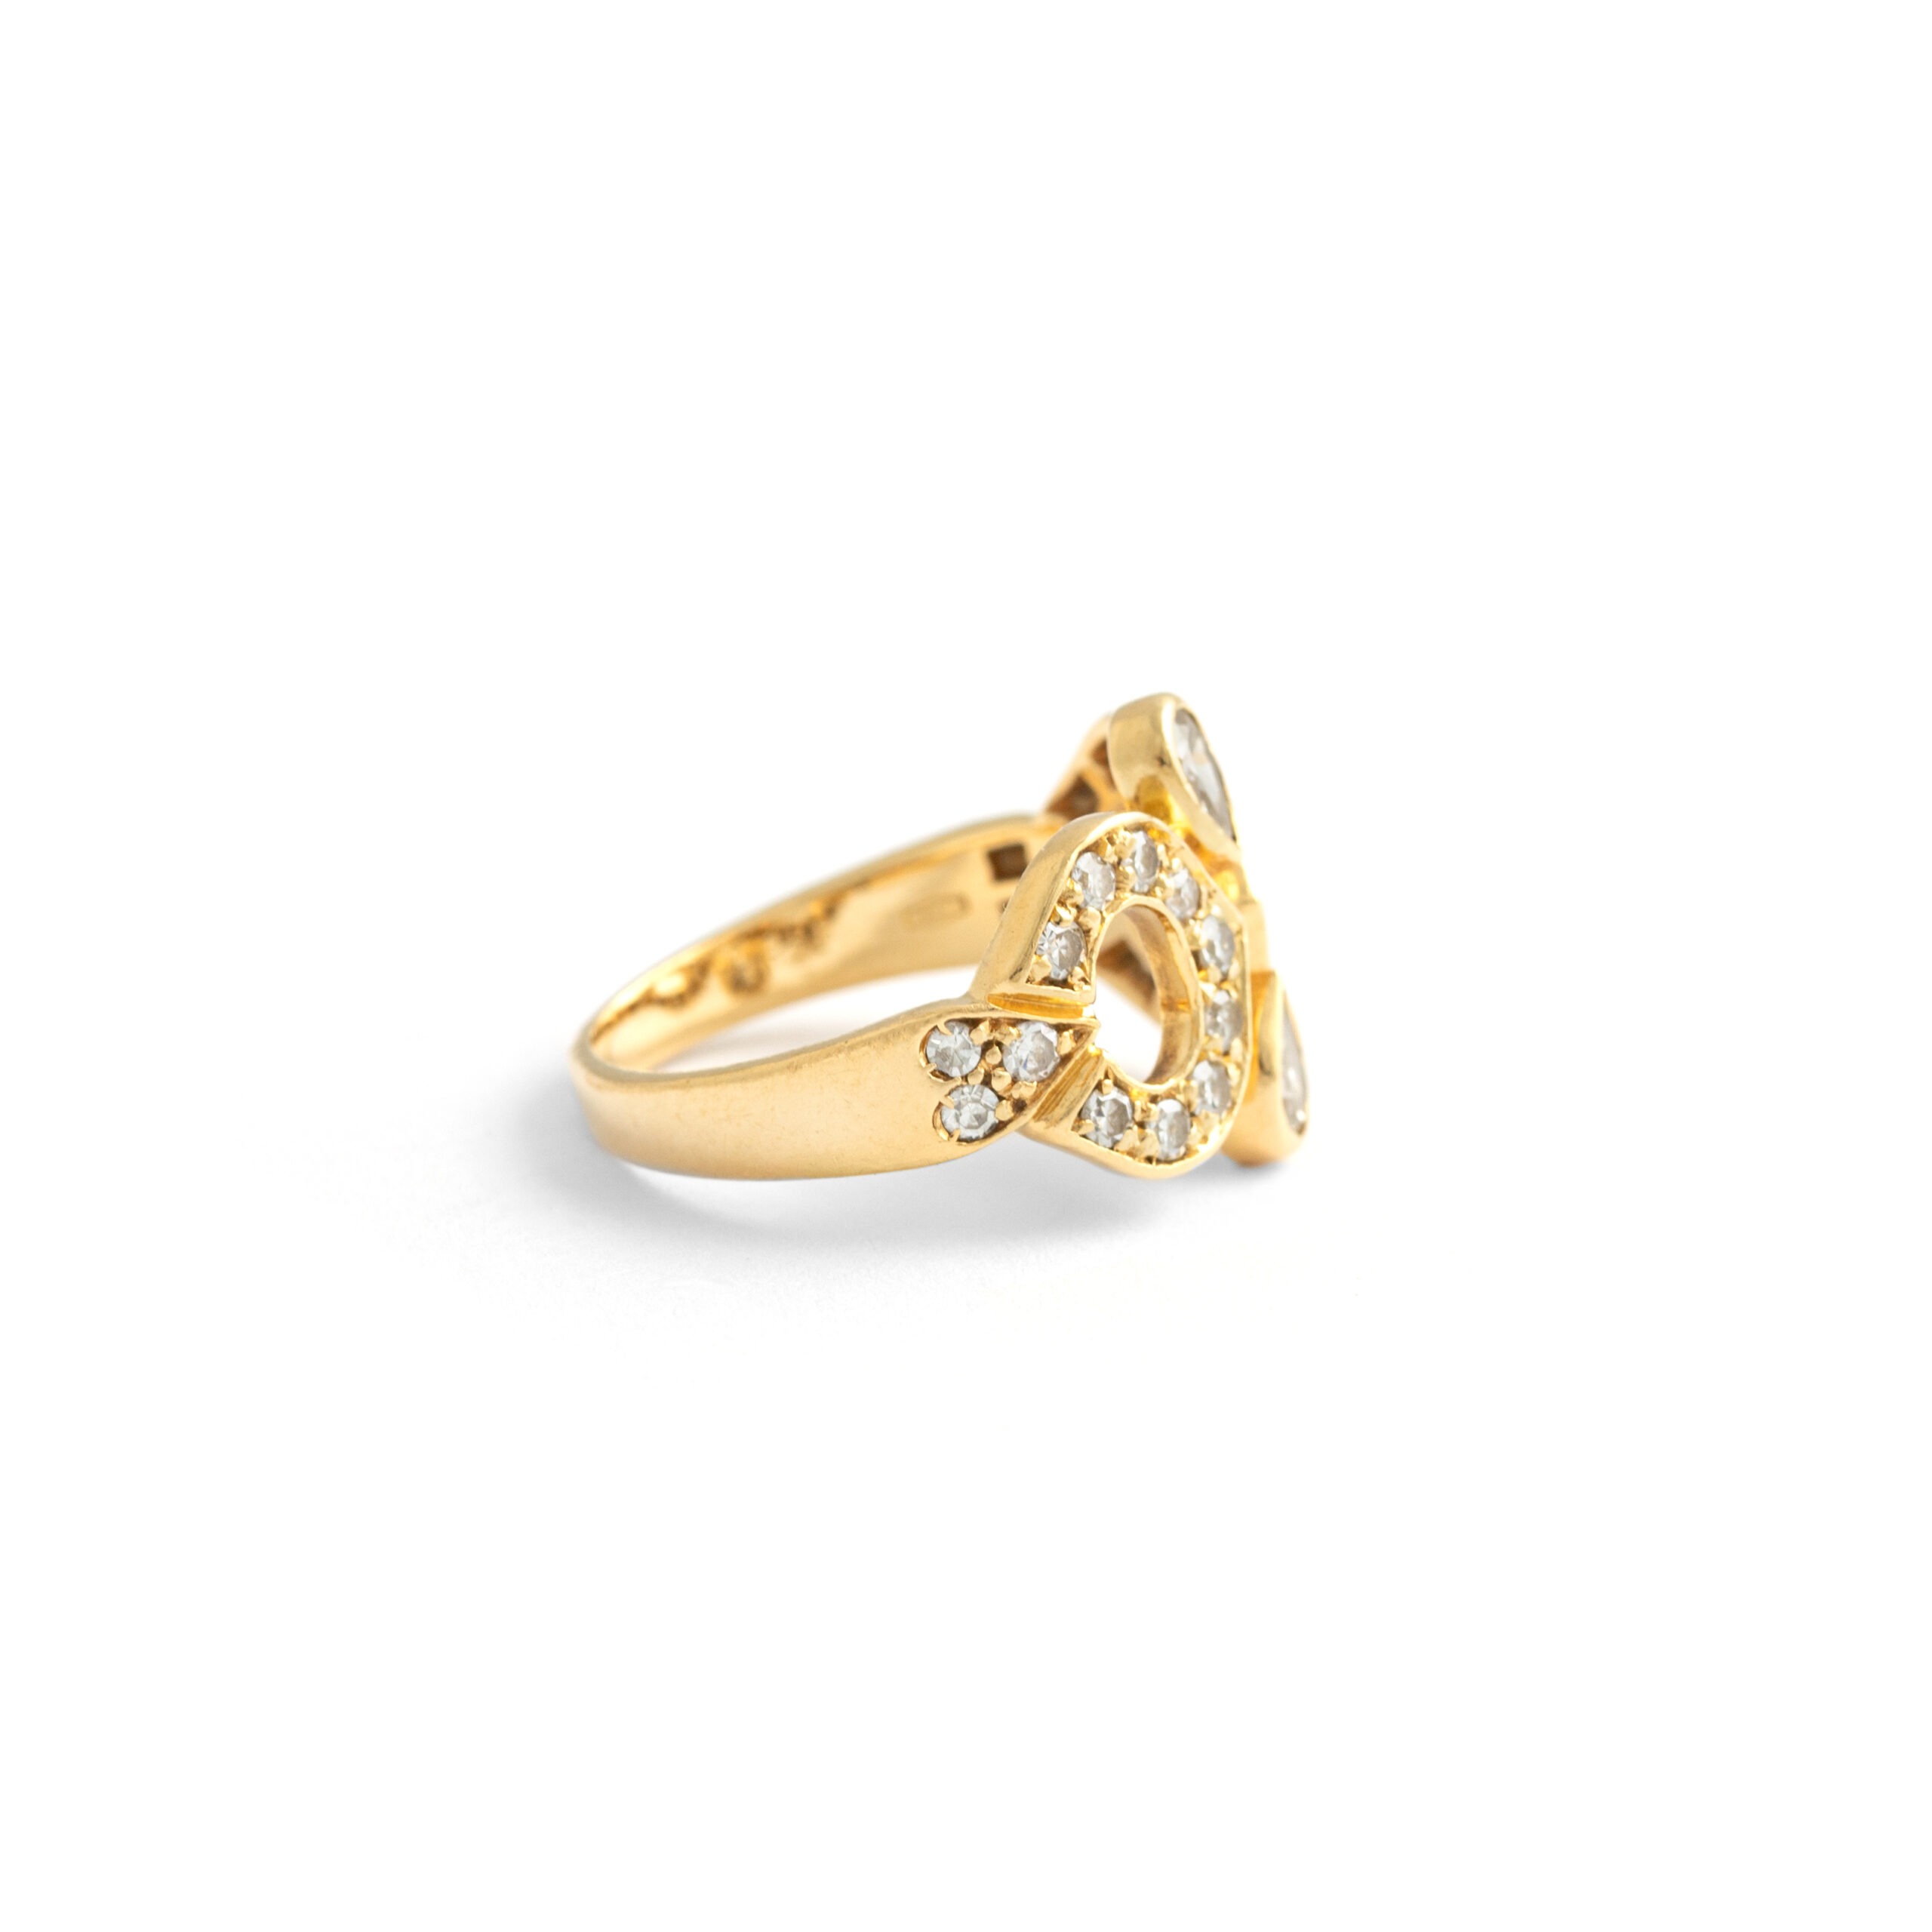 Side view of a Cartier ring in yellow gold, the pattern is in the shape of a horizontal eight and is adorned with 24 round diamonds. Two pear shaped diamonds are in the center of the ring and point towards each other